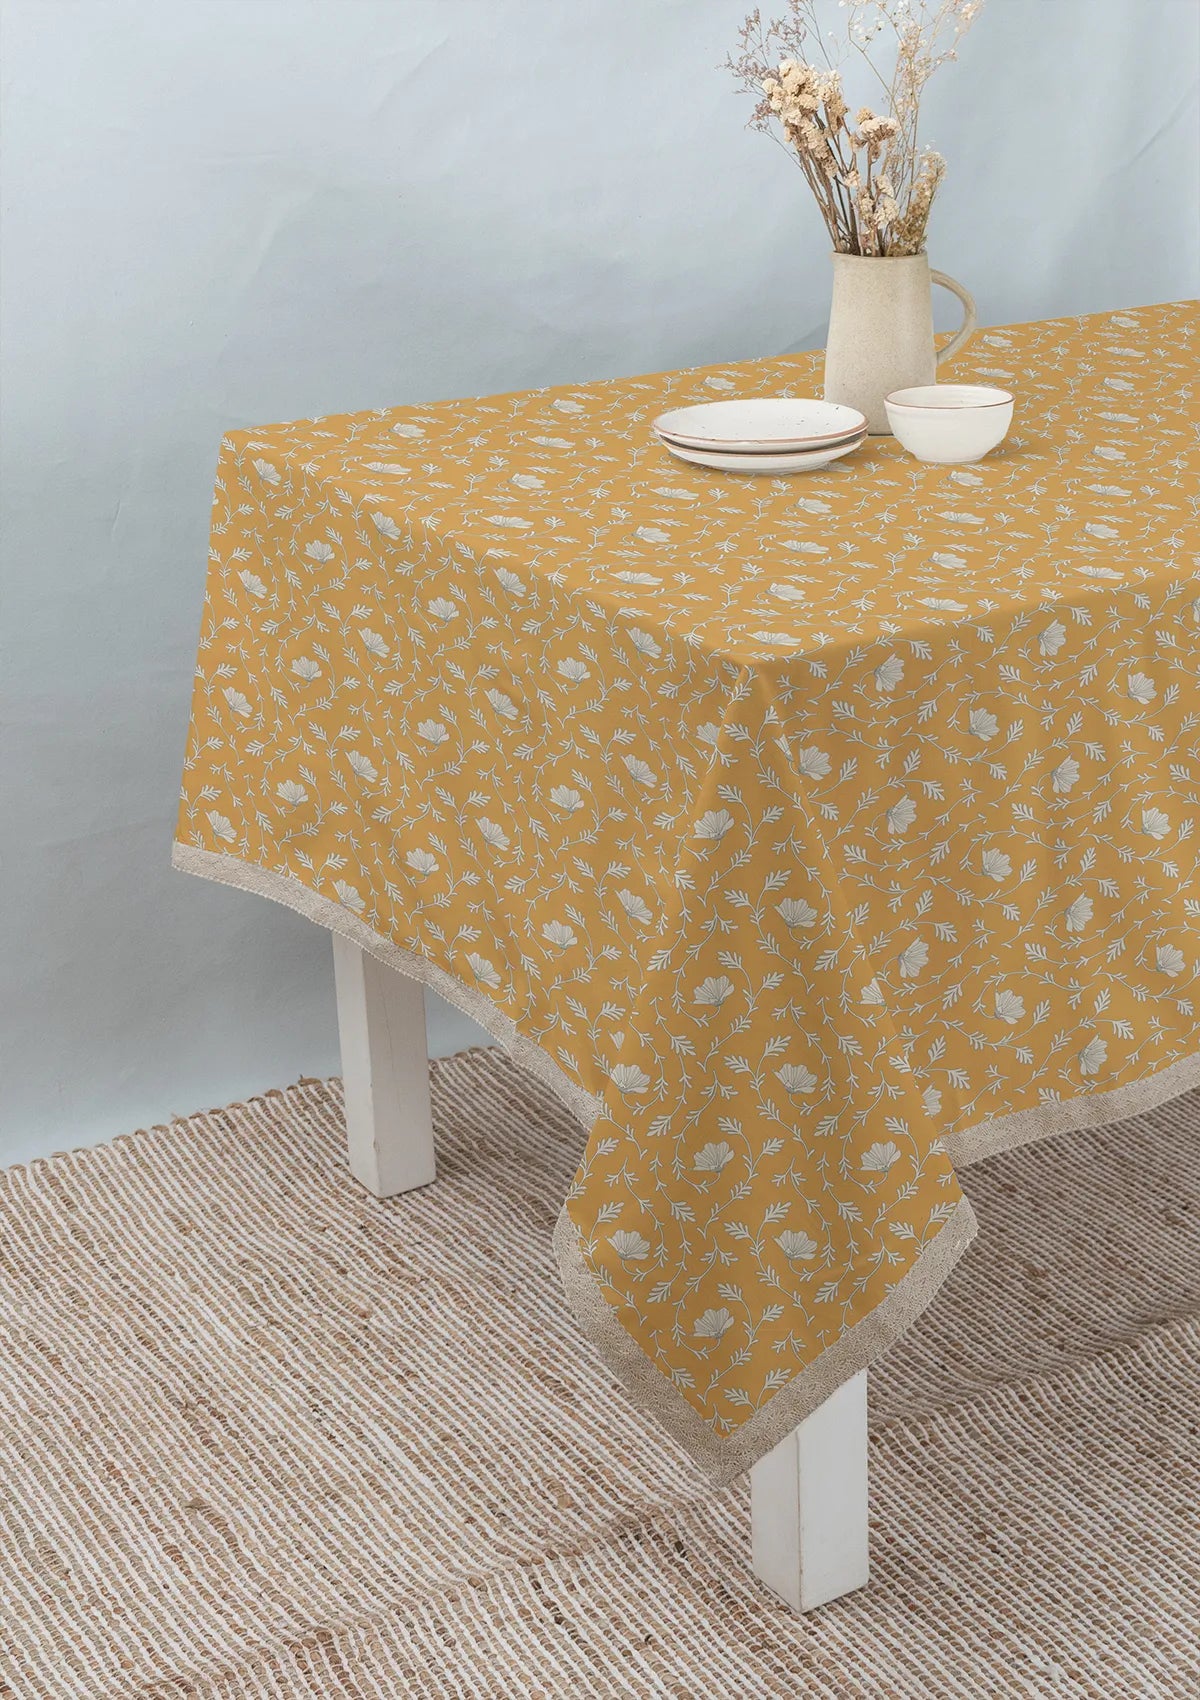 Eden mustard 100% cotton floral table cloth for 4 seater or 6 seater dining with lace border